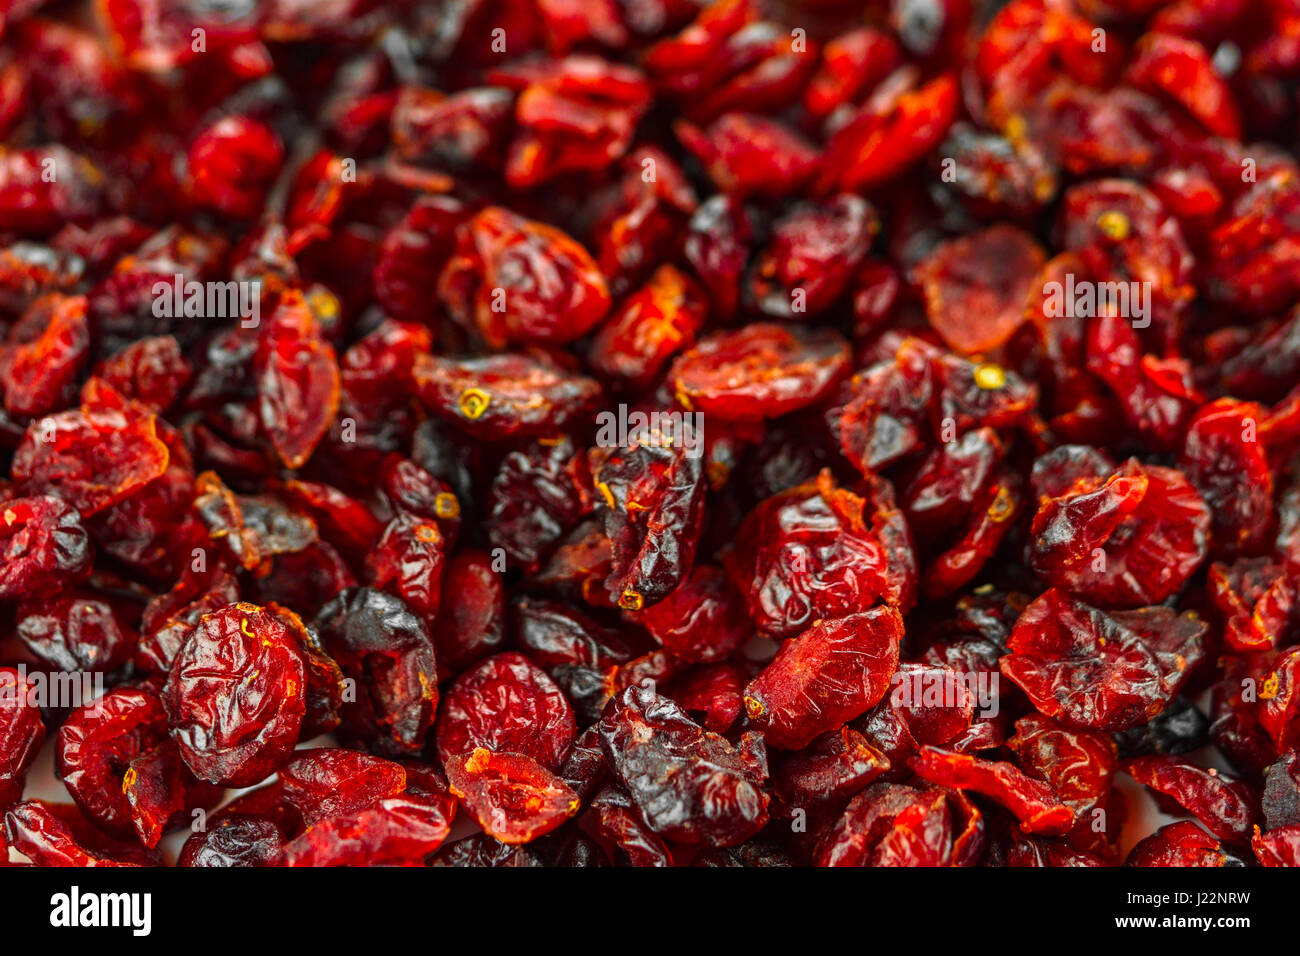 Dried Healthy Foods Stock Photo